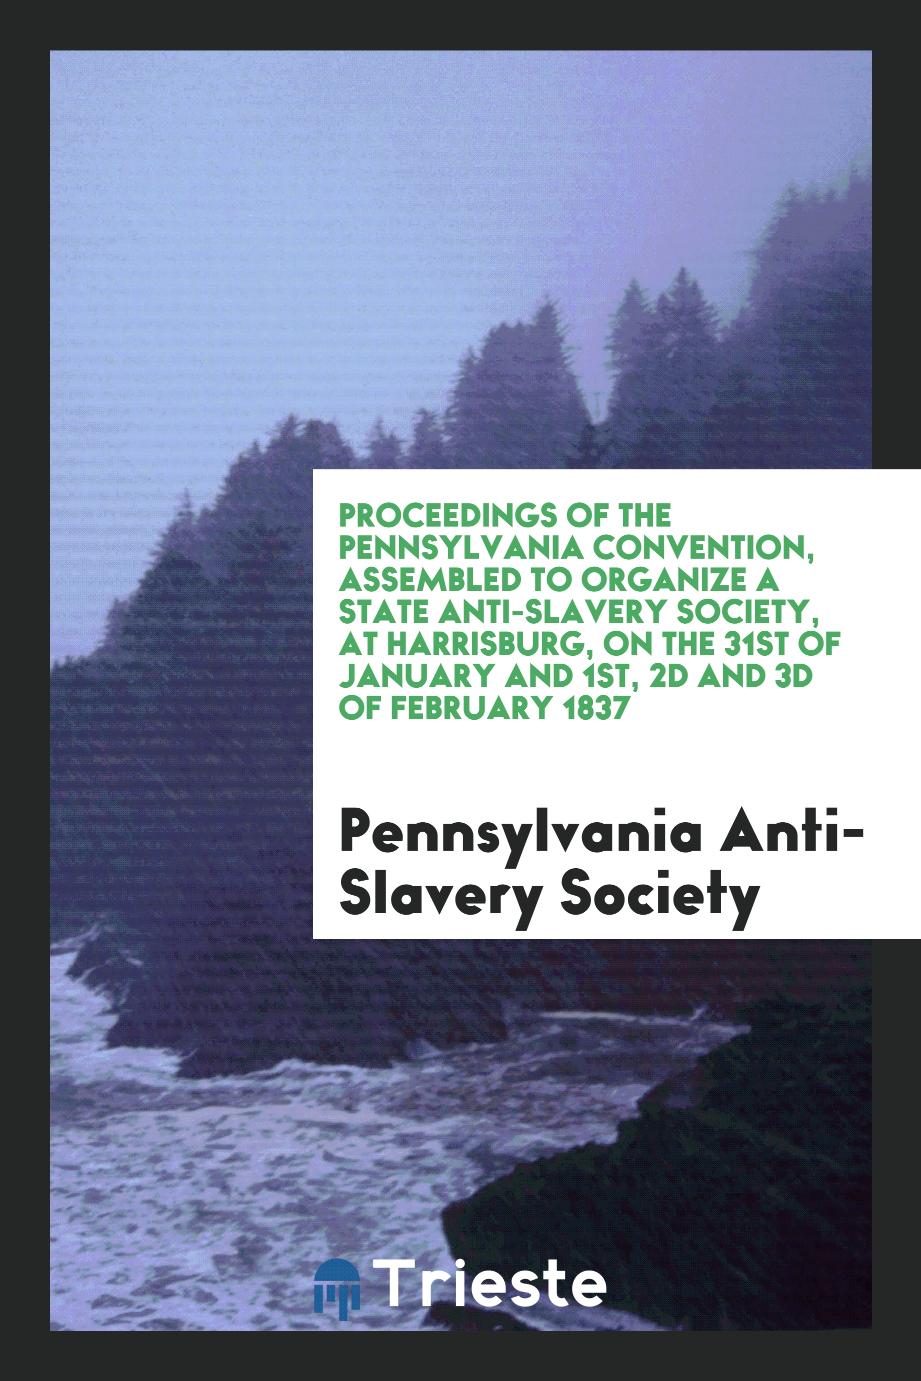 Proceedings of the Pennsylvania Convention, Assembled to Organize a State Anti-Slavery Society, at Harrisburg, on the 31st of January and 1st, 2d and 3d of February 1837